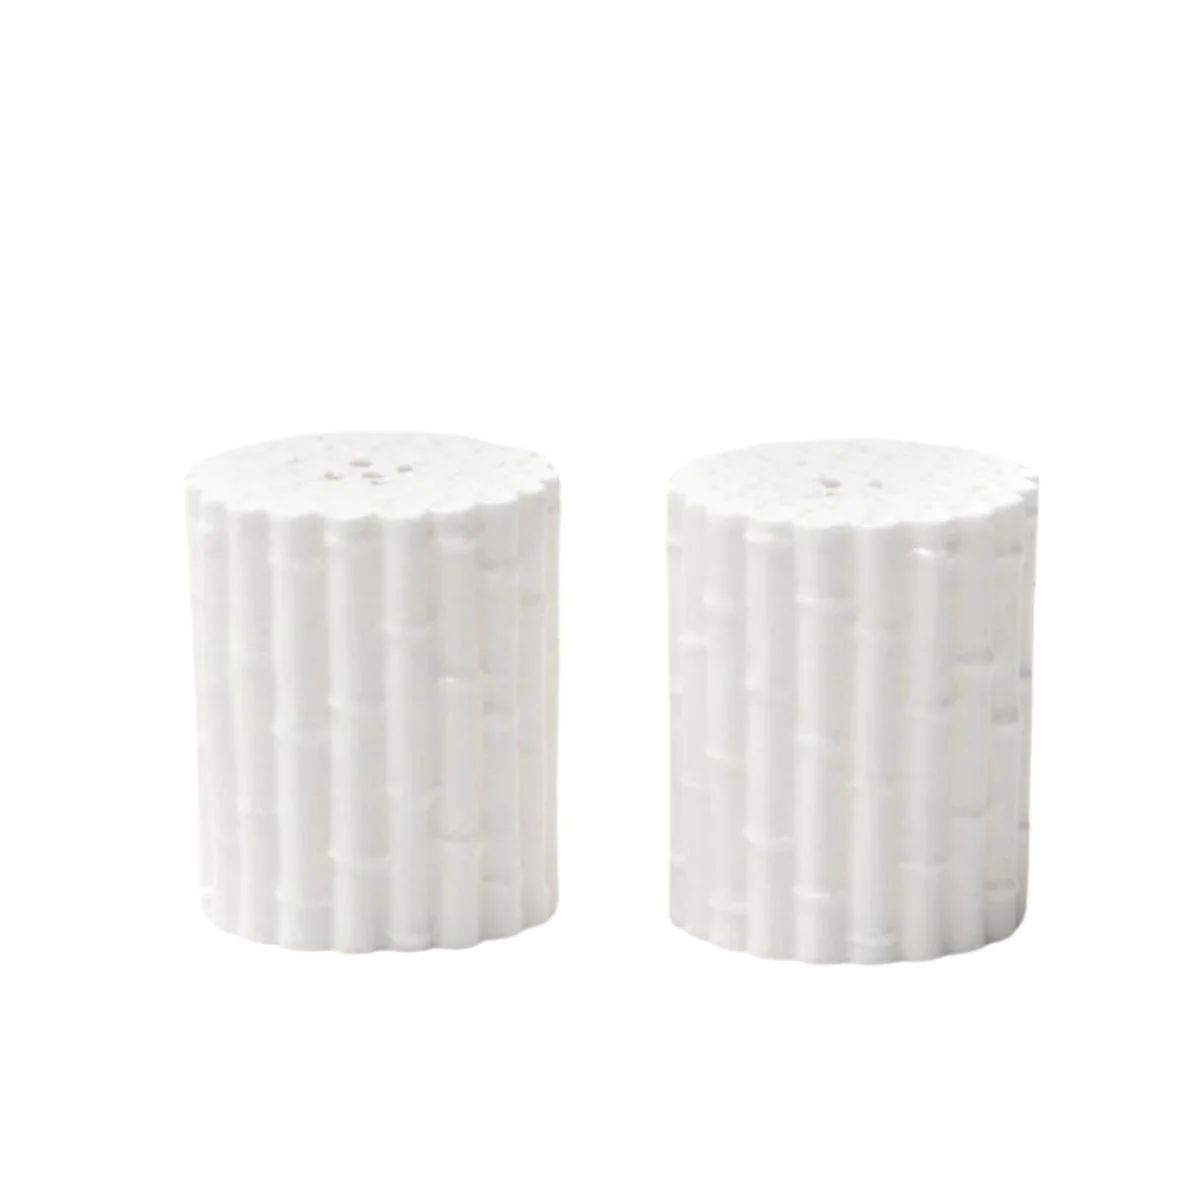 Salt and Pepper Shakers, Bamboo | Paloma & Co.